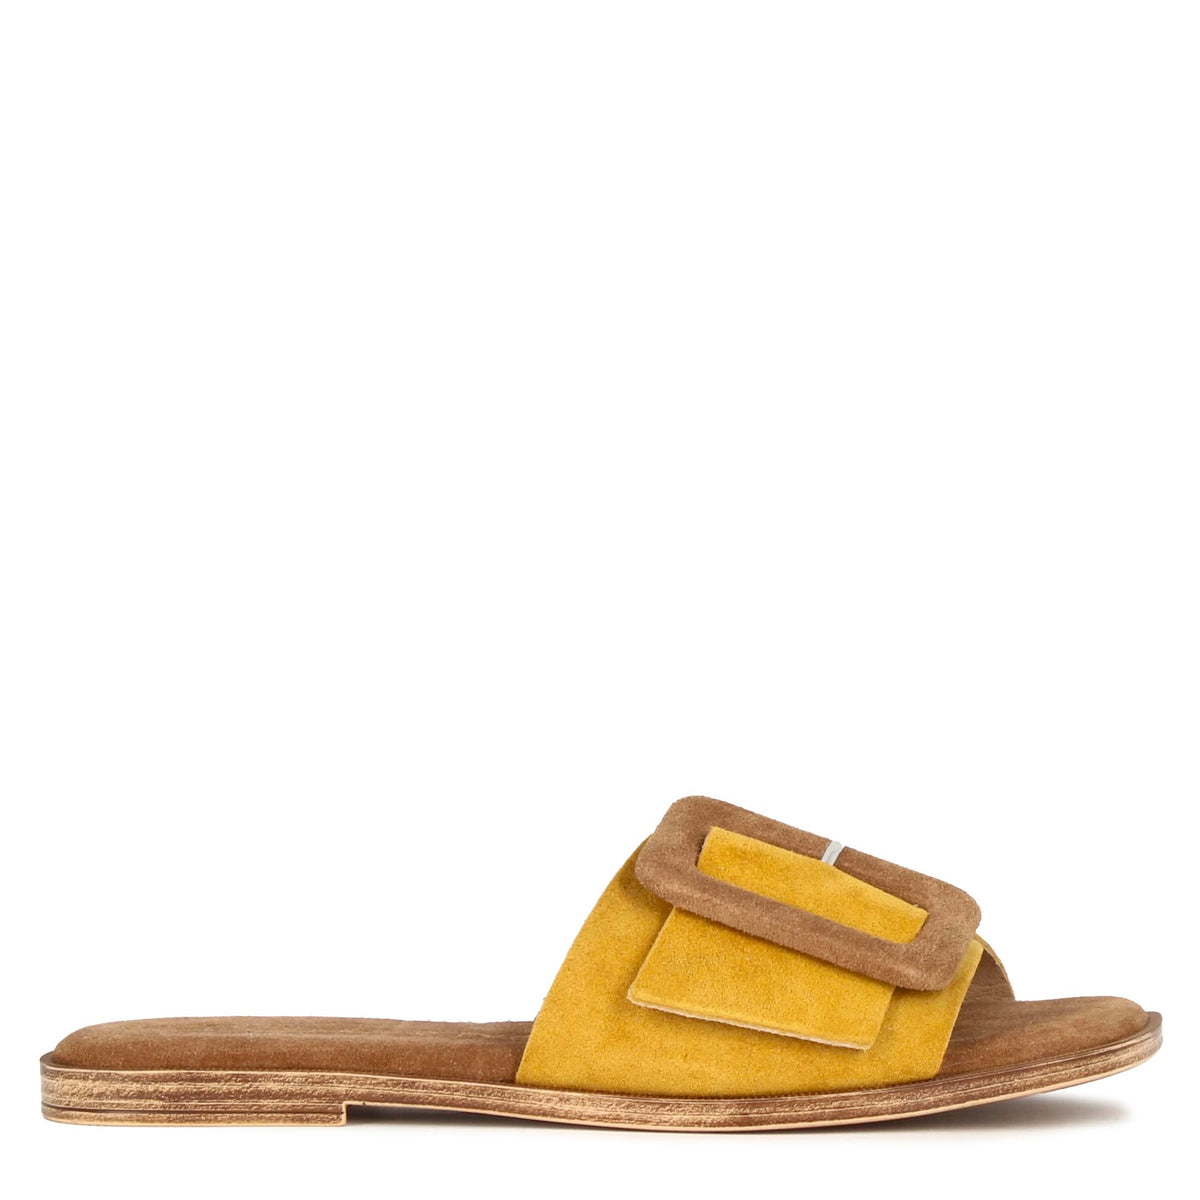 Women's yellow and brown suede slippers